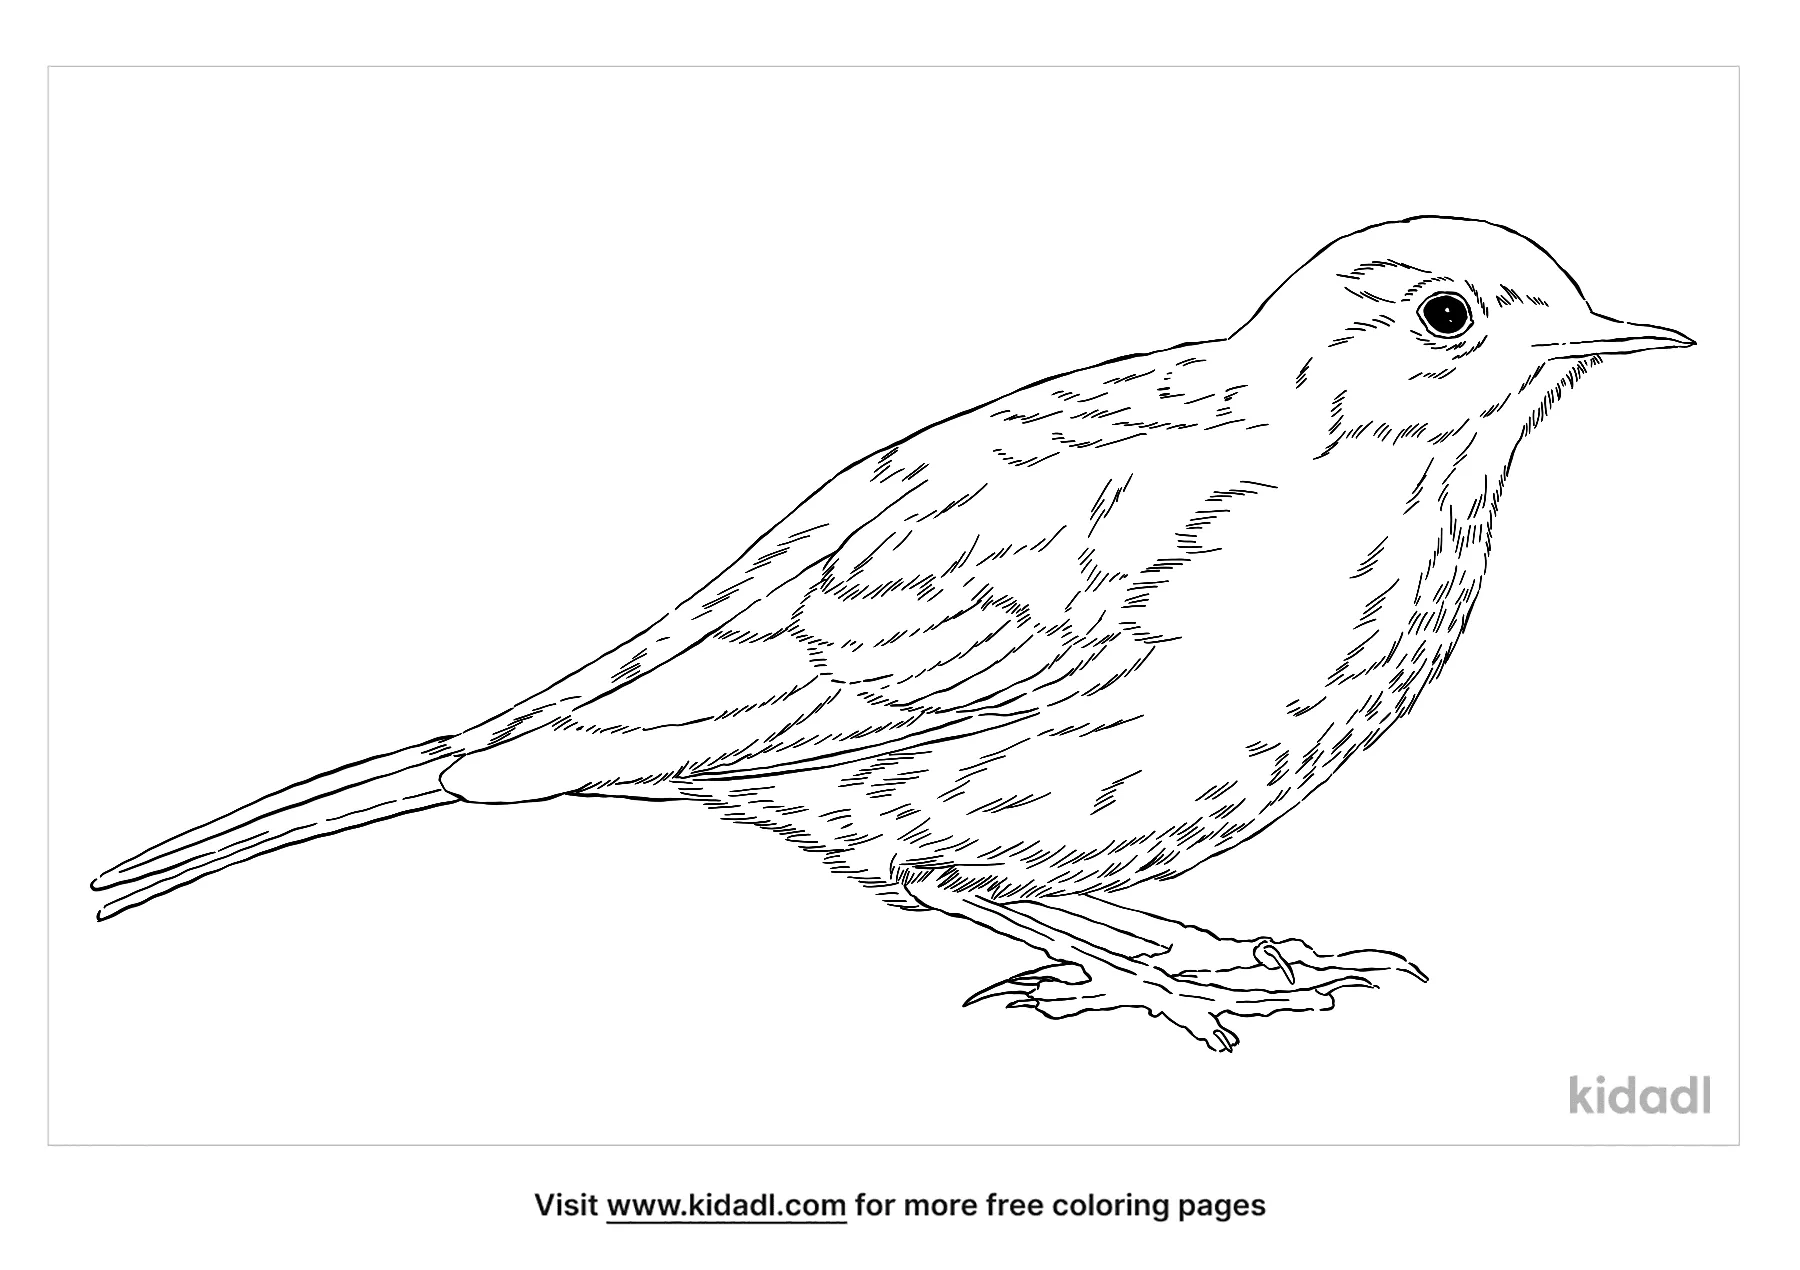 Free American Pipit Coloring Page | Coloring Page Printables | Kidadl